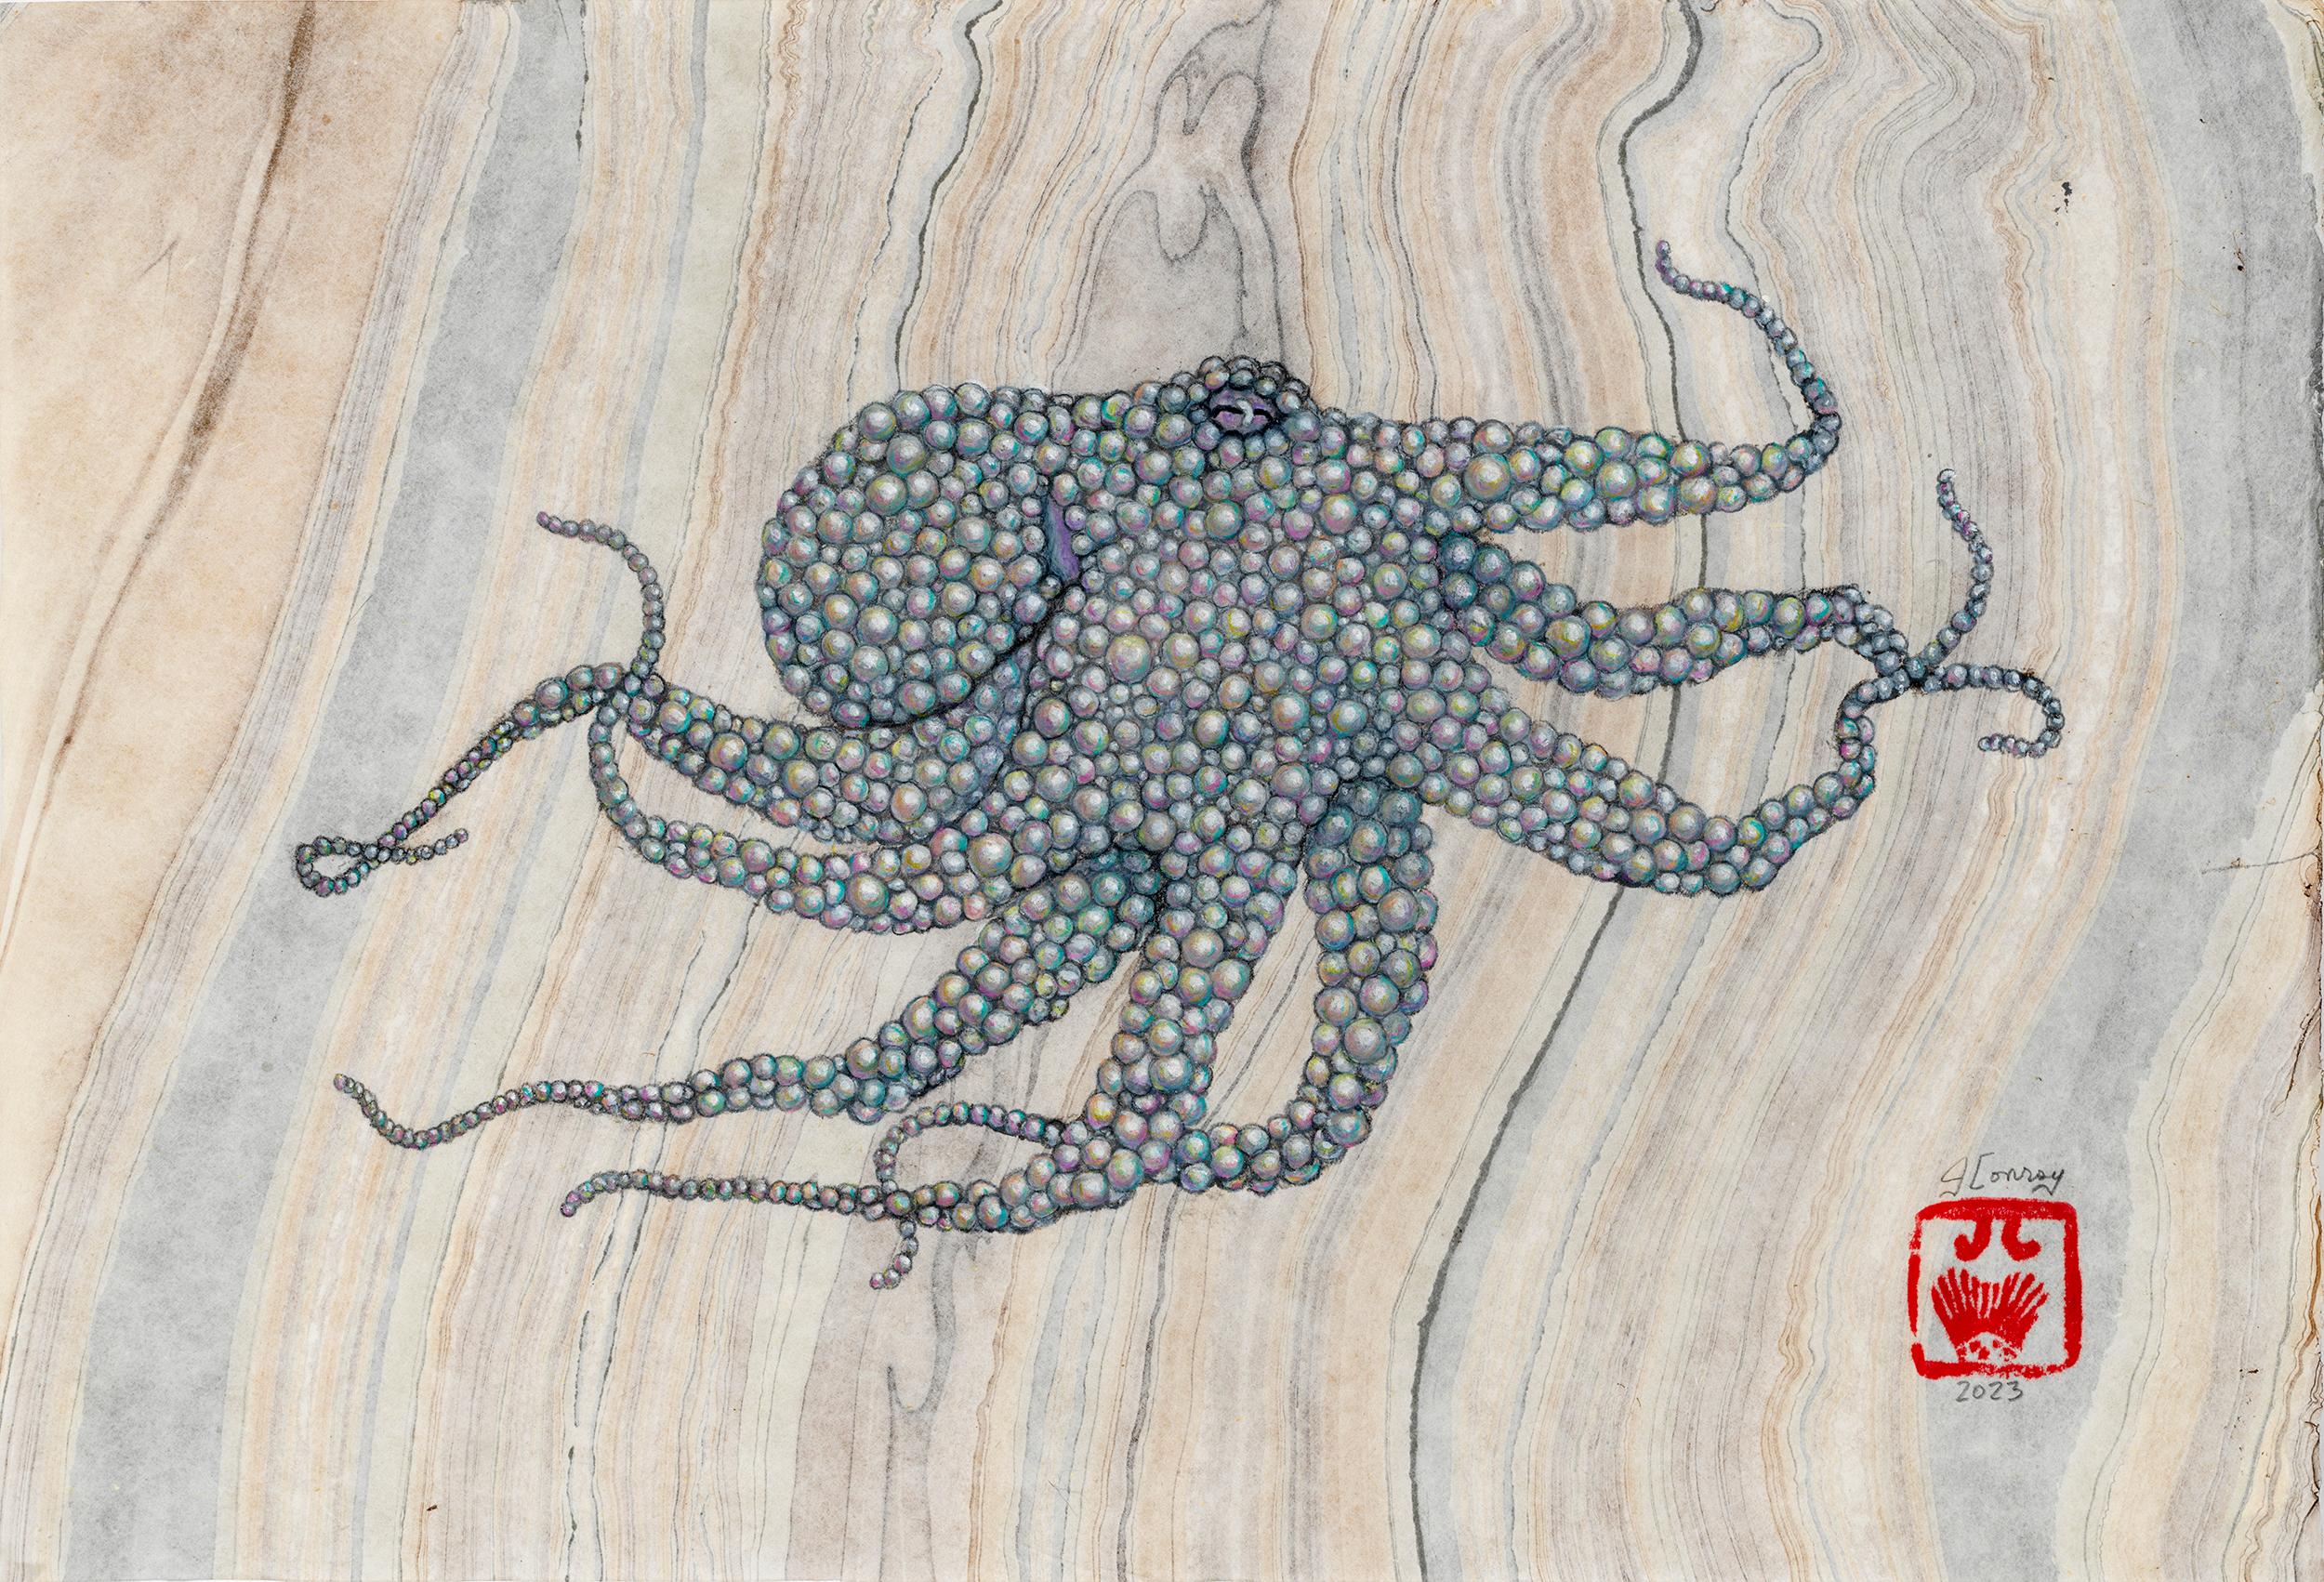 Jeff Conroy Animal Painting - String of Pearls - Gyotaku Style Sumi Ink Painting of an Octopus, Mulberry Paper